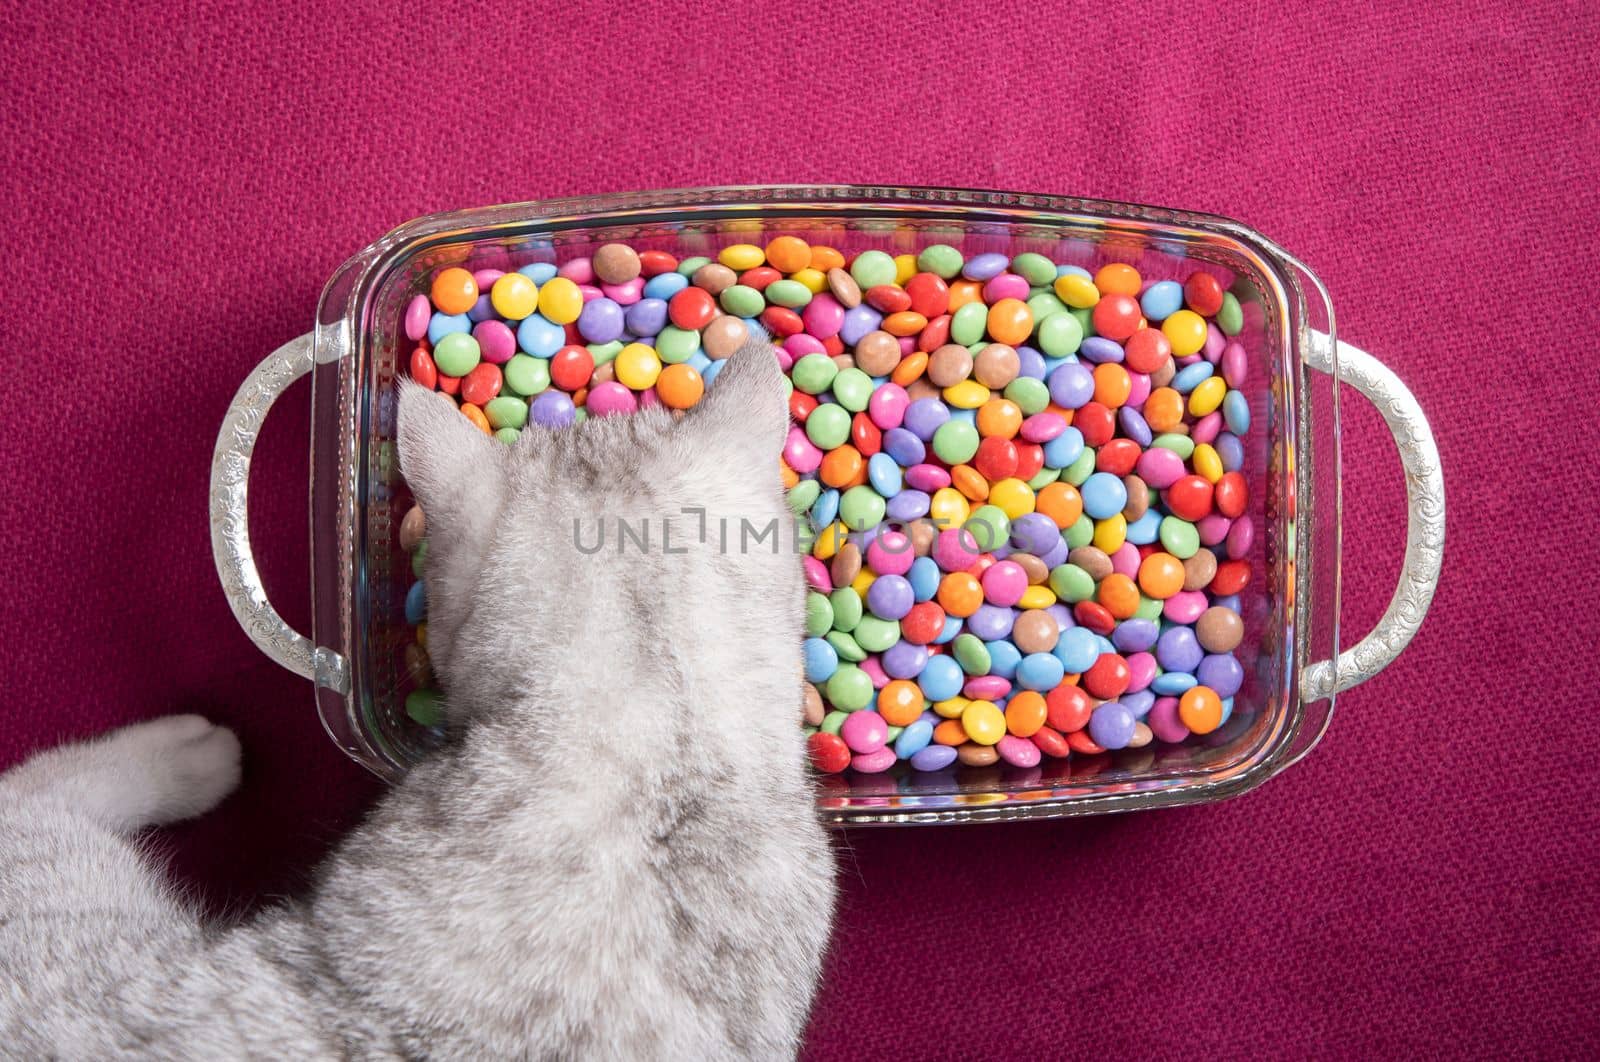 curious kitten looks at multi-colored round candies, bright and colorful background, High Quality Photo. High quality photo